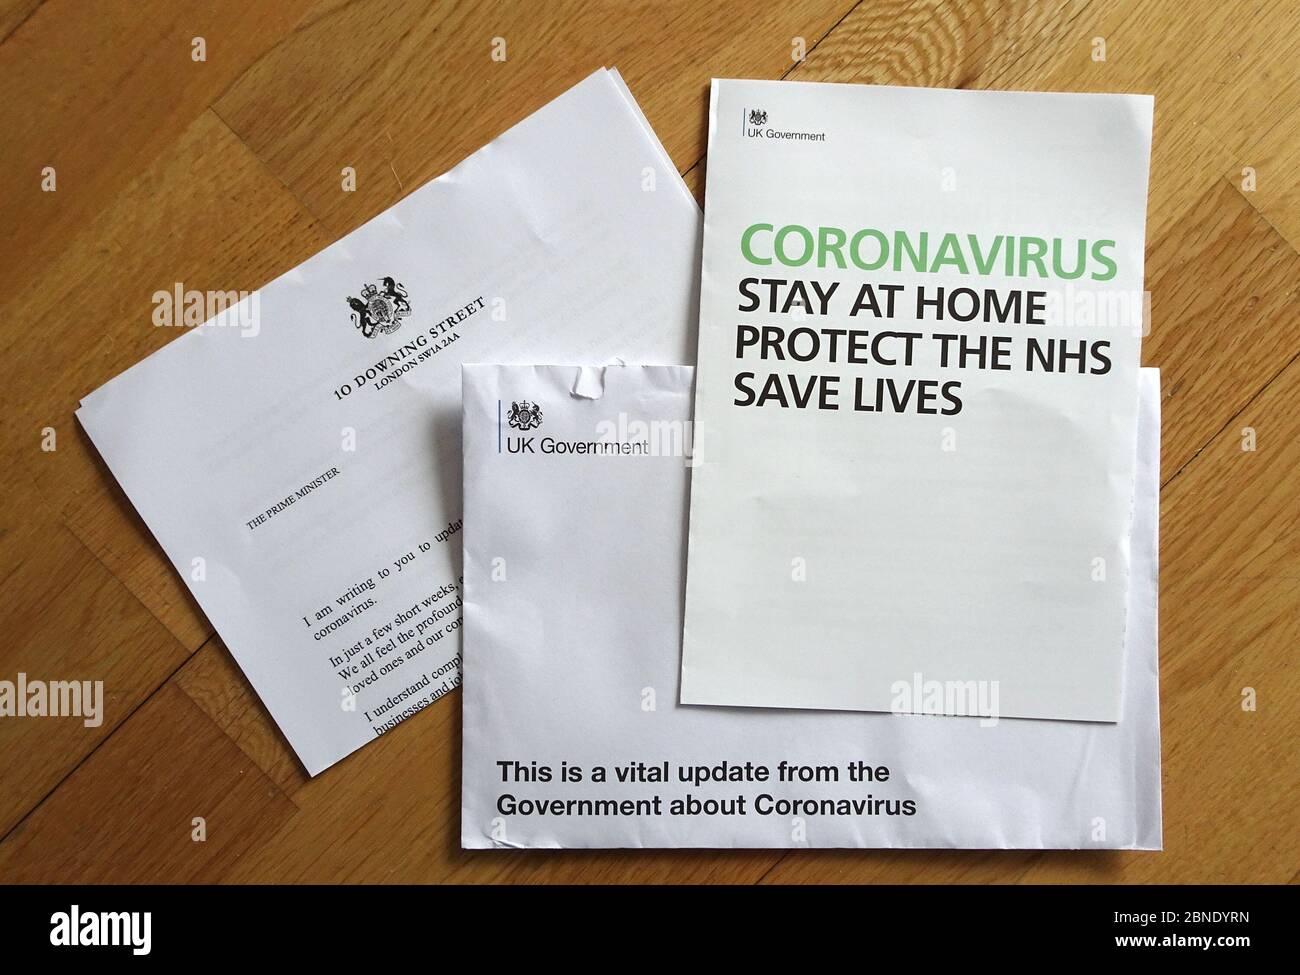 London, United Kingdom - April 08, 2020: Wooden table and letter from prime minister with information & advisory about coronavirus covid-19 outbreak t Stock Photo